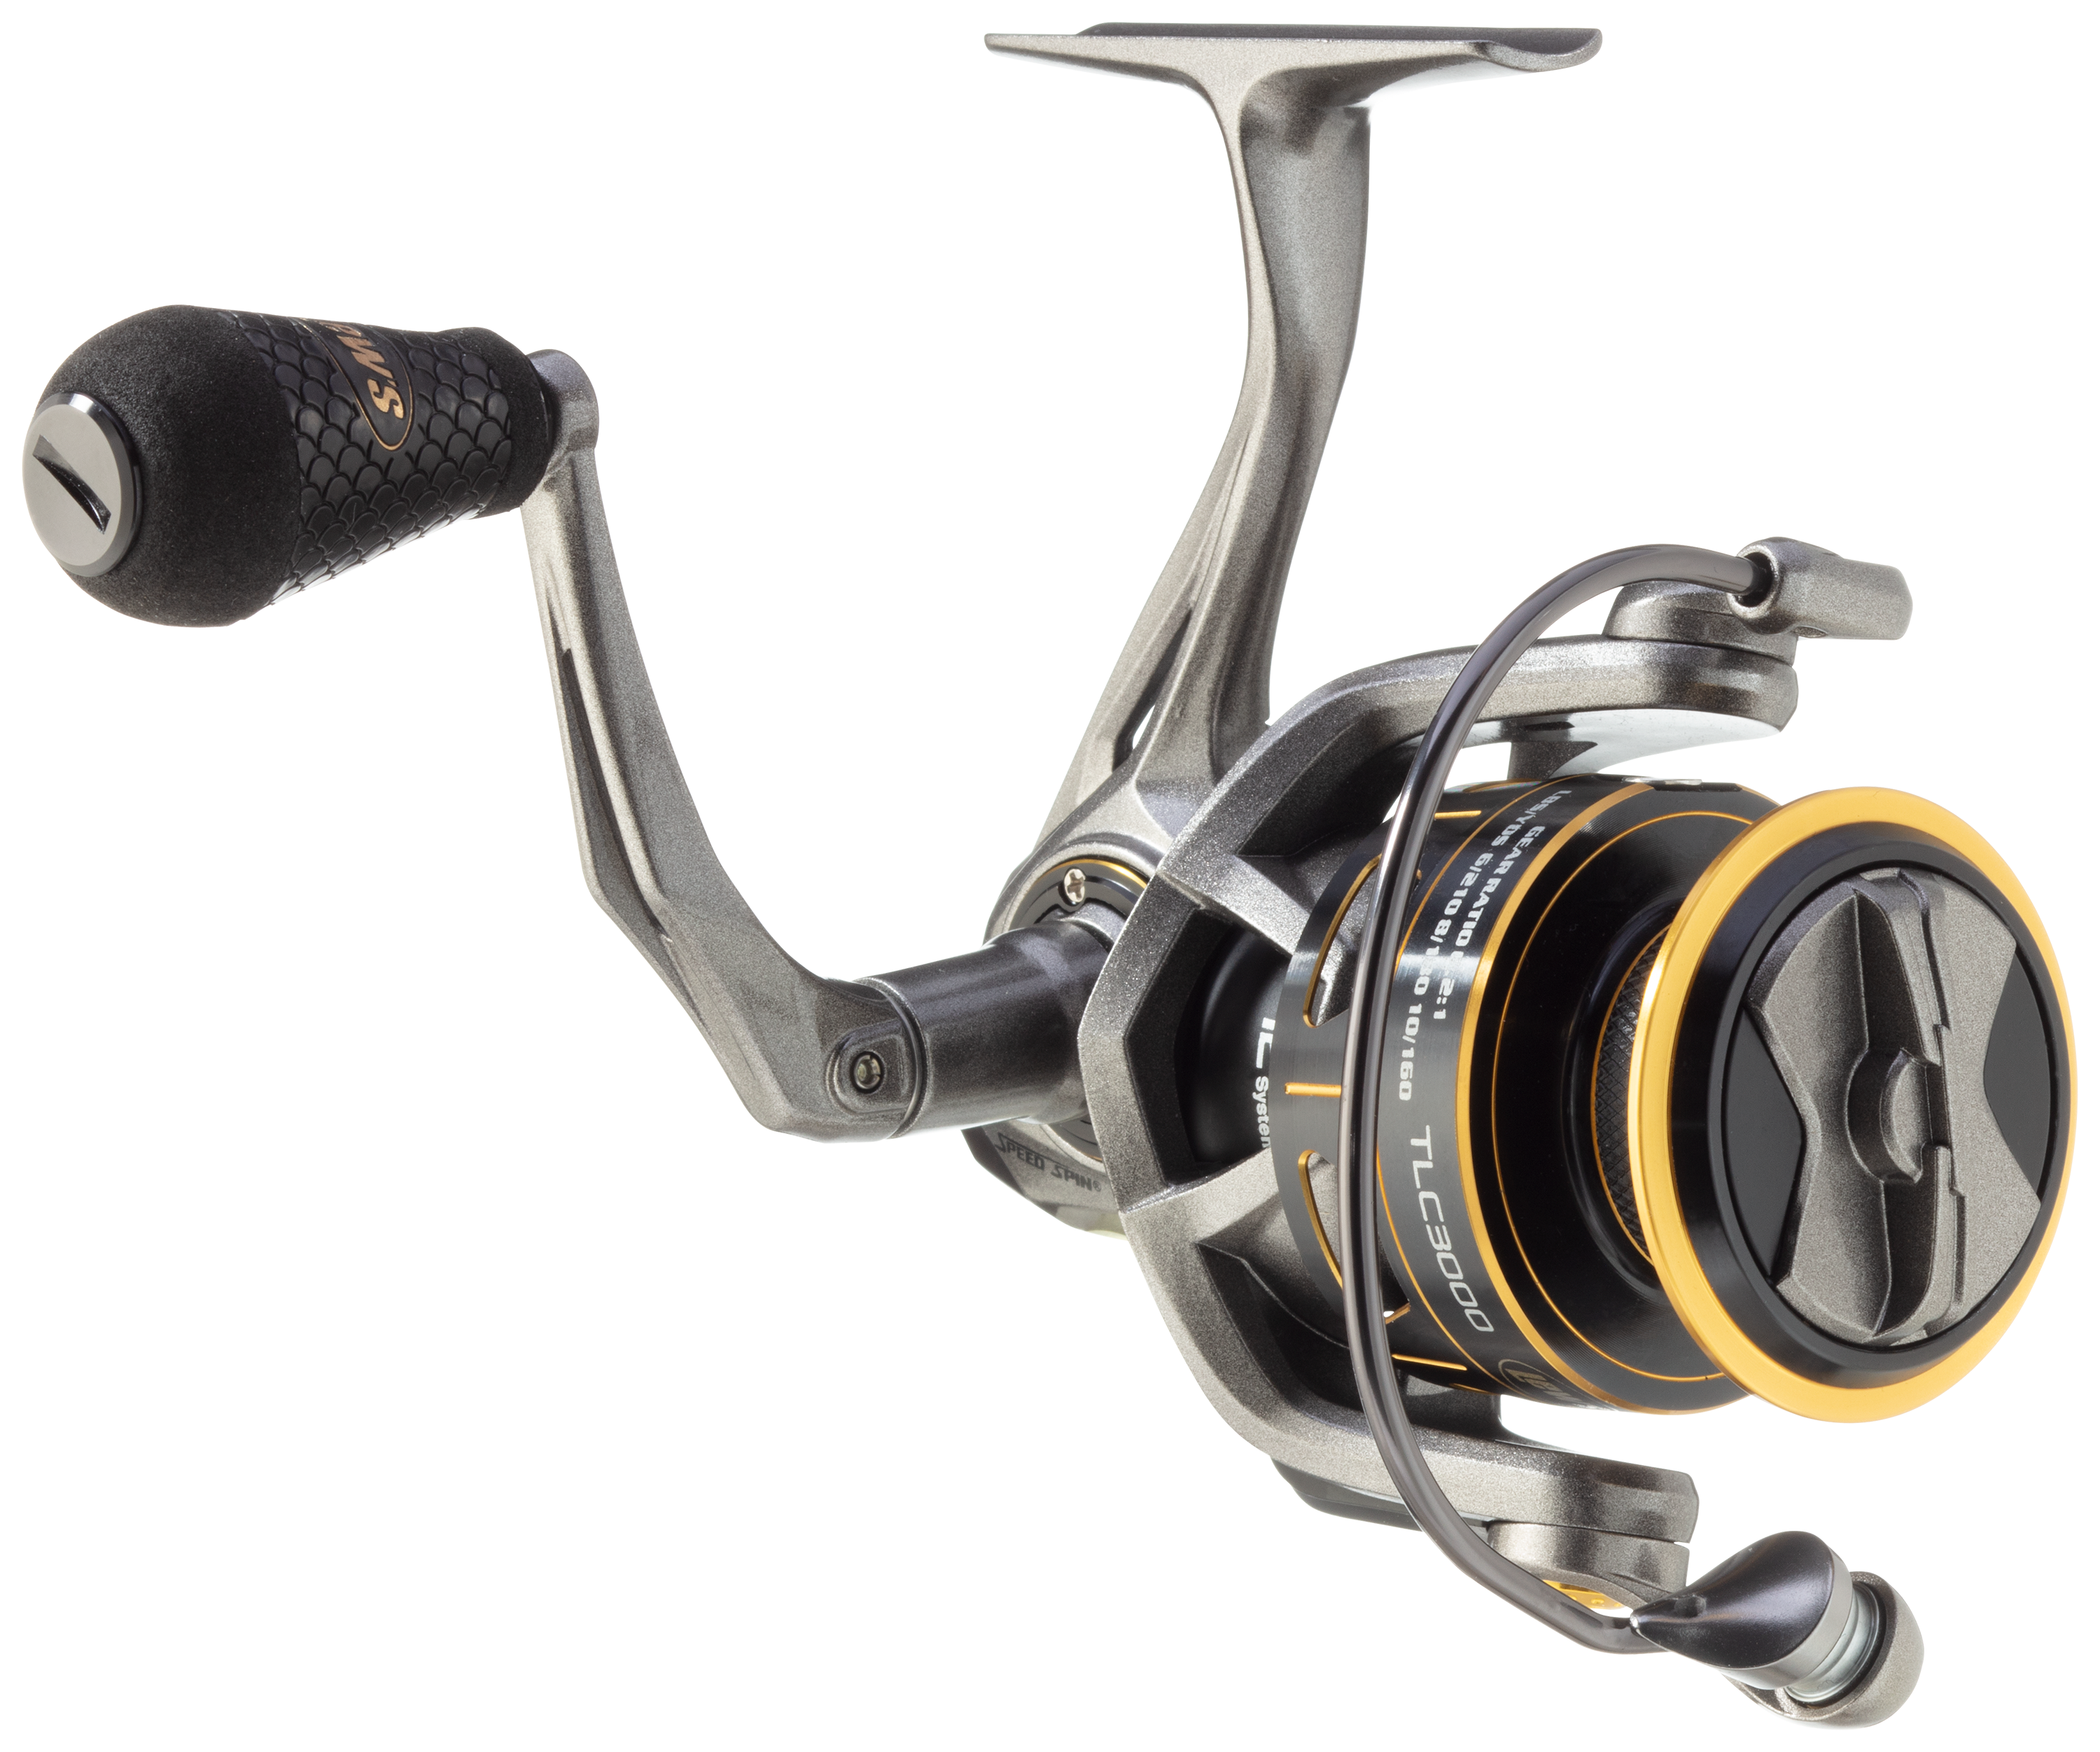 Team Lew's Custom Pro Speed Spin Spinning Reel - 6.2:1 - 3000 Size